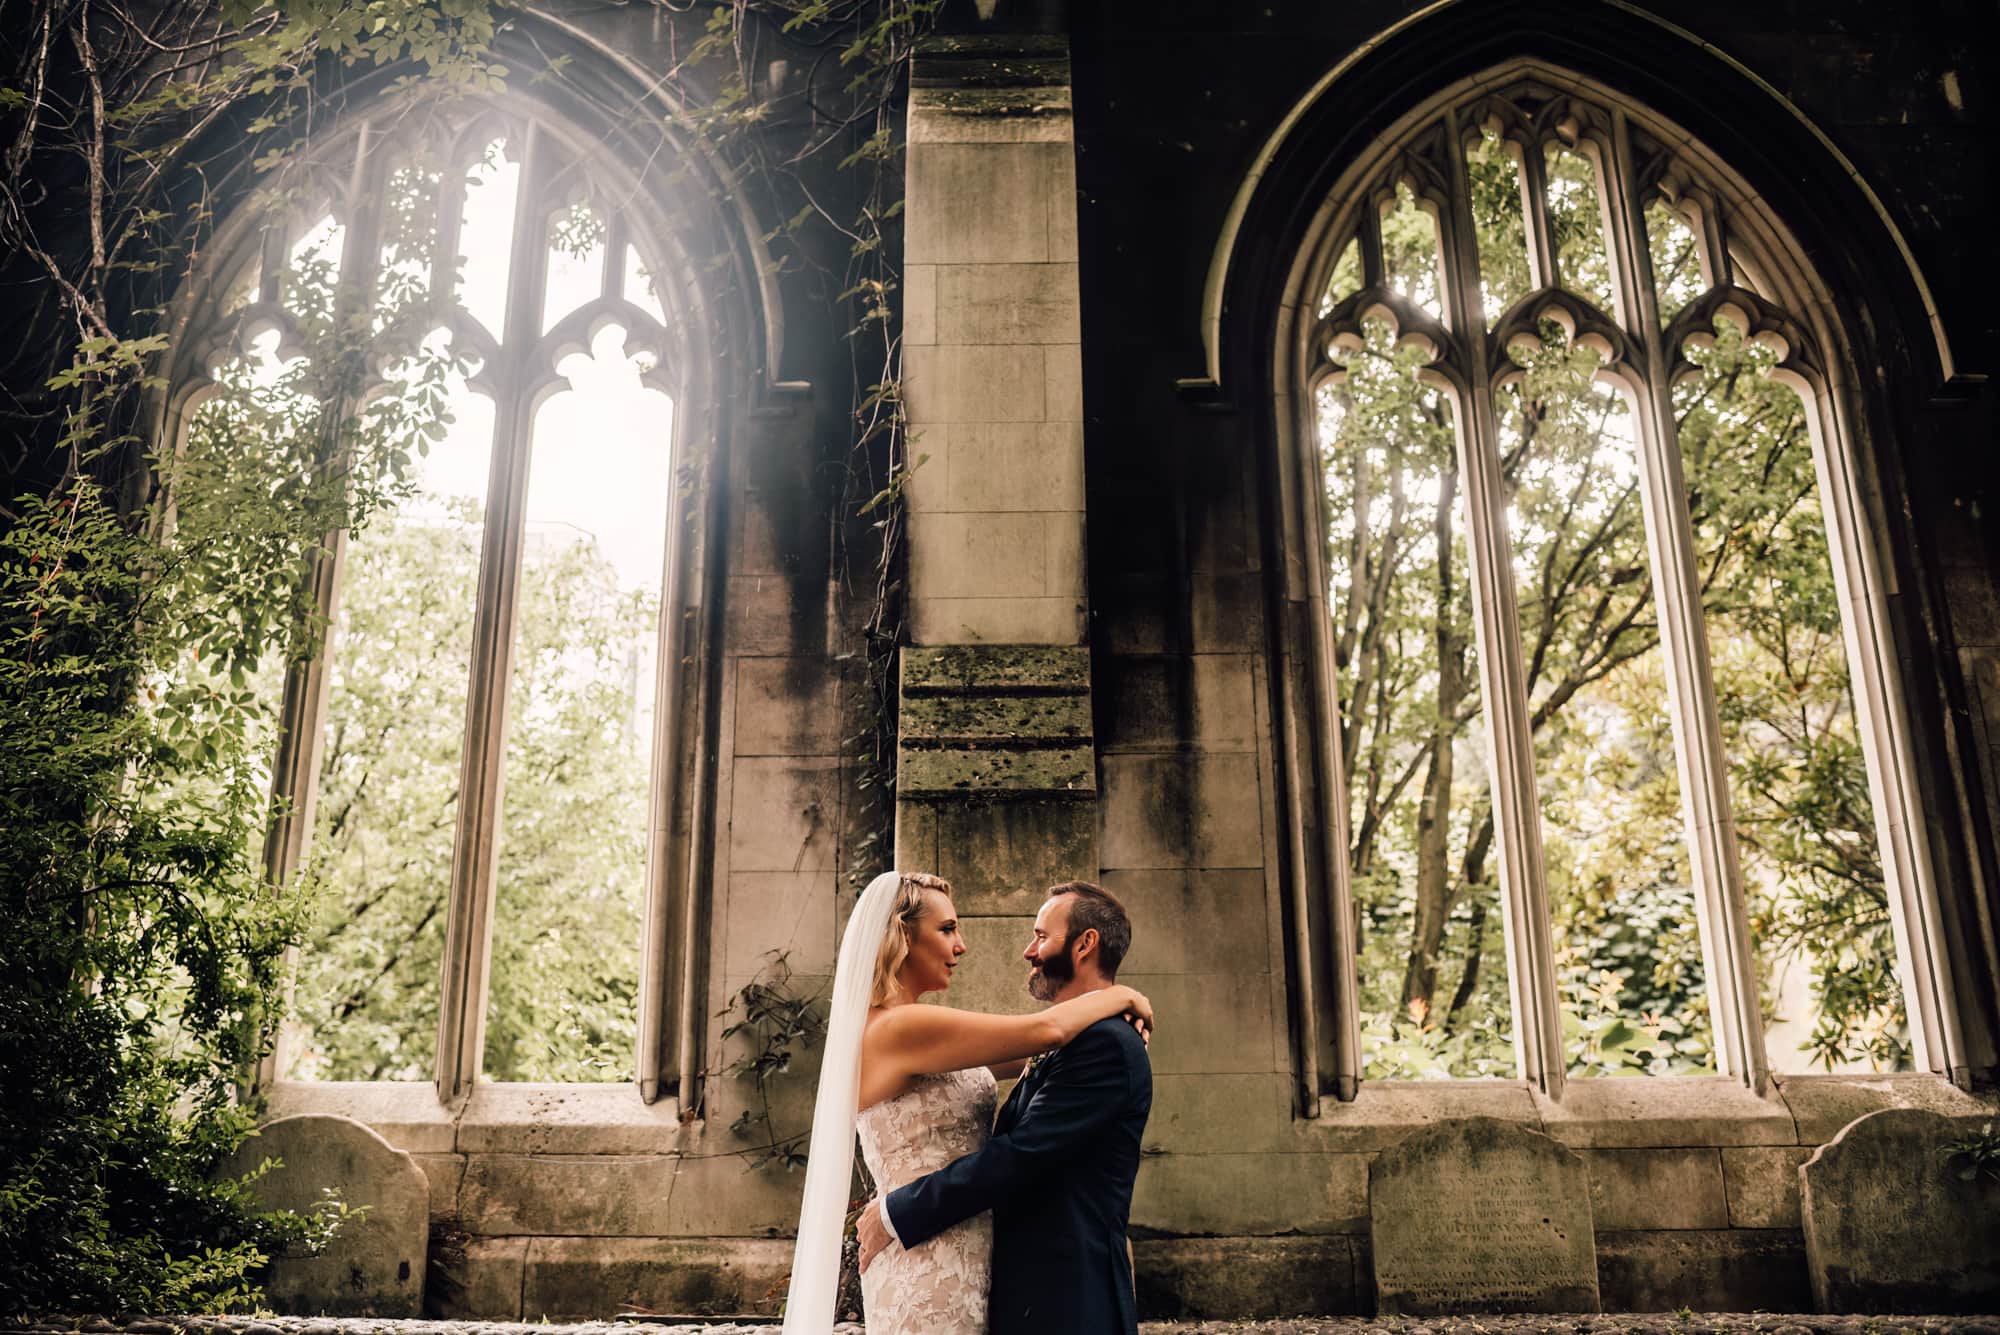 Super Chic London Wedding couple at St Dunstan in East Gardens